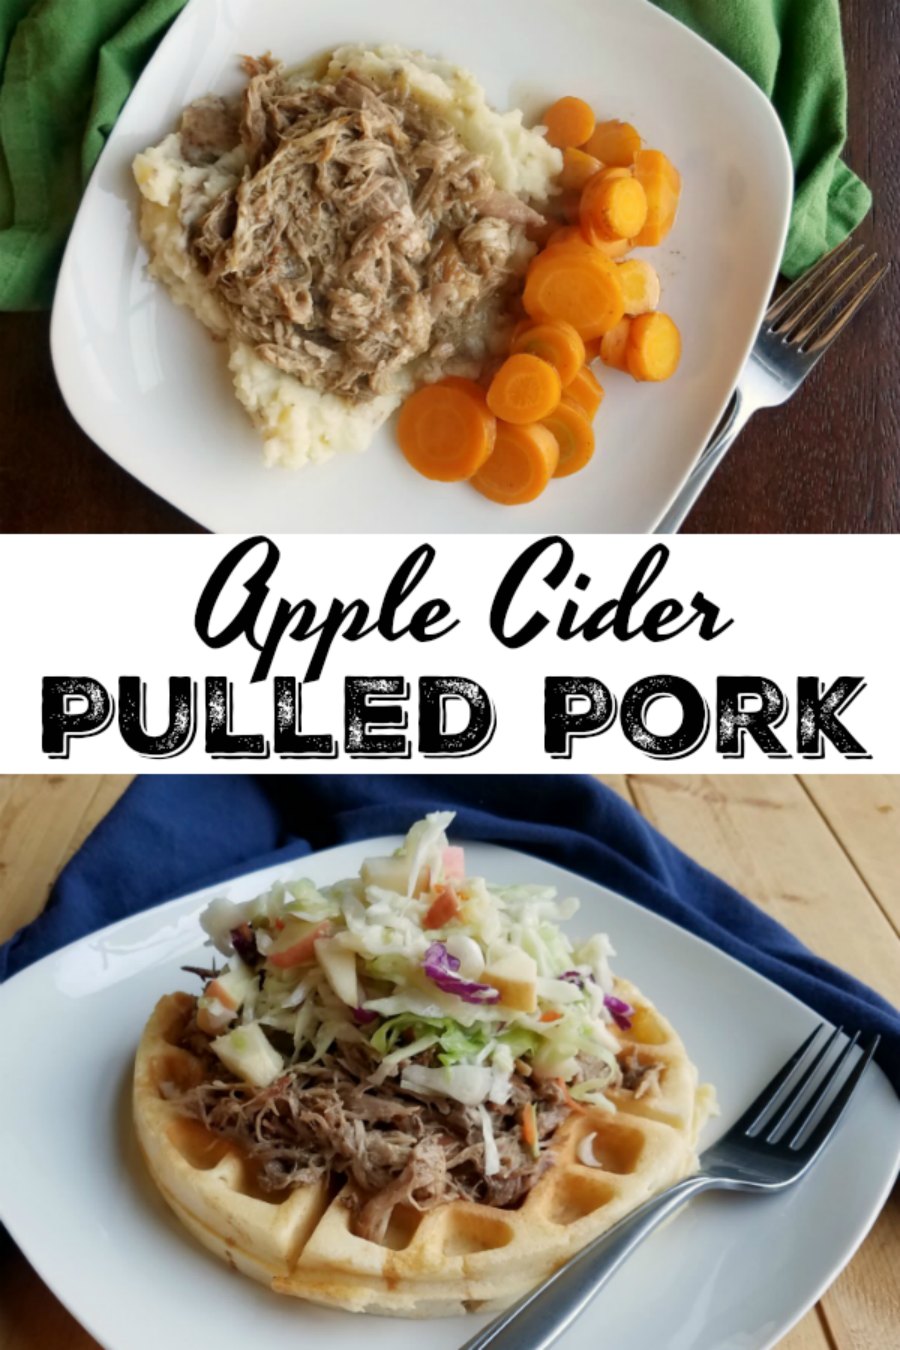 This apple cider pulled pork is a delicious twist on a family favorite. The house will smell so good the whole time it cooks too!